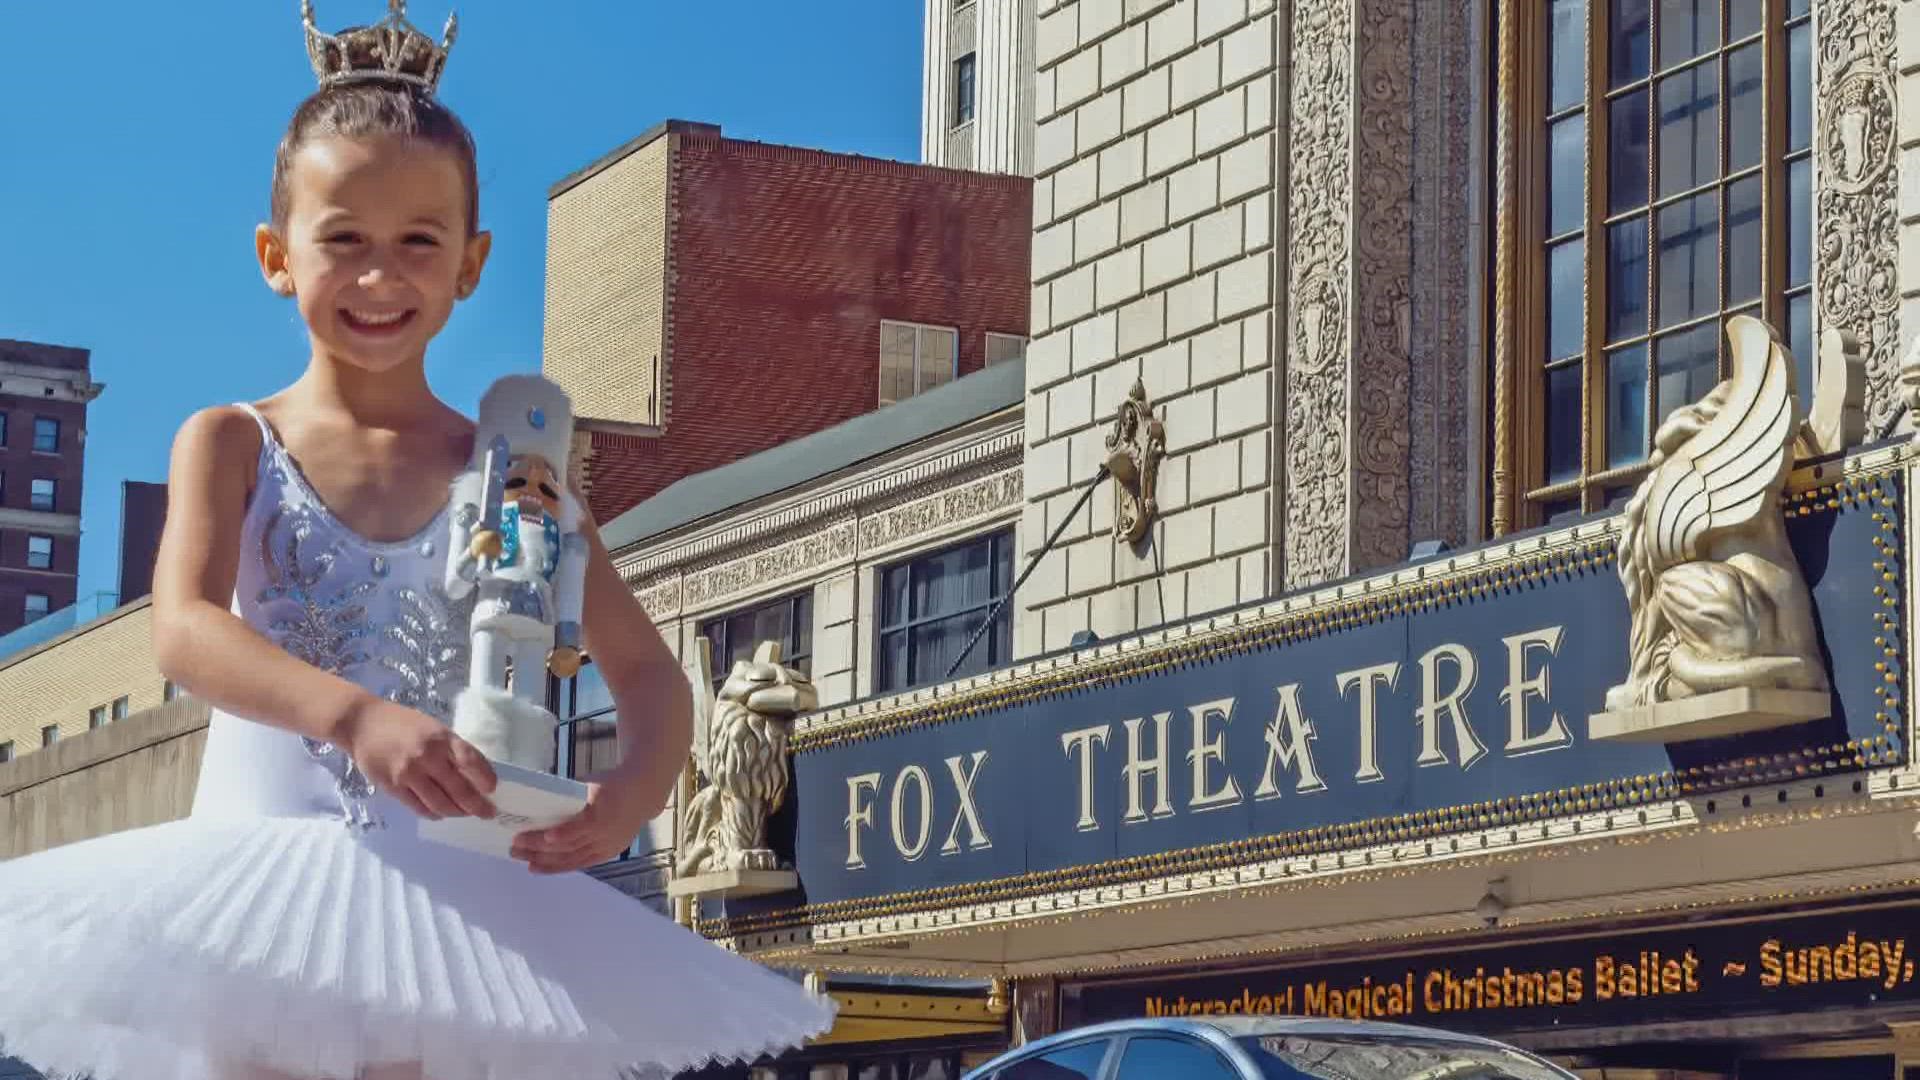 The 30th anniversary of The Nutcracker will perform at the Fabulous Fox theater in St. Louis this month. Sydney will dance as a snowflake in The Nutcracker.